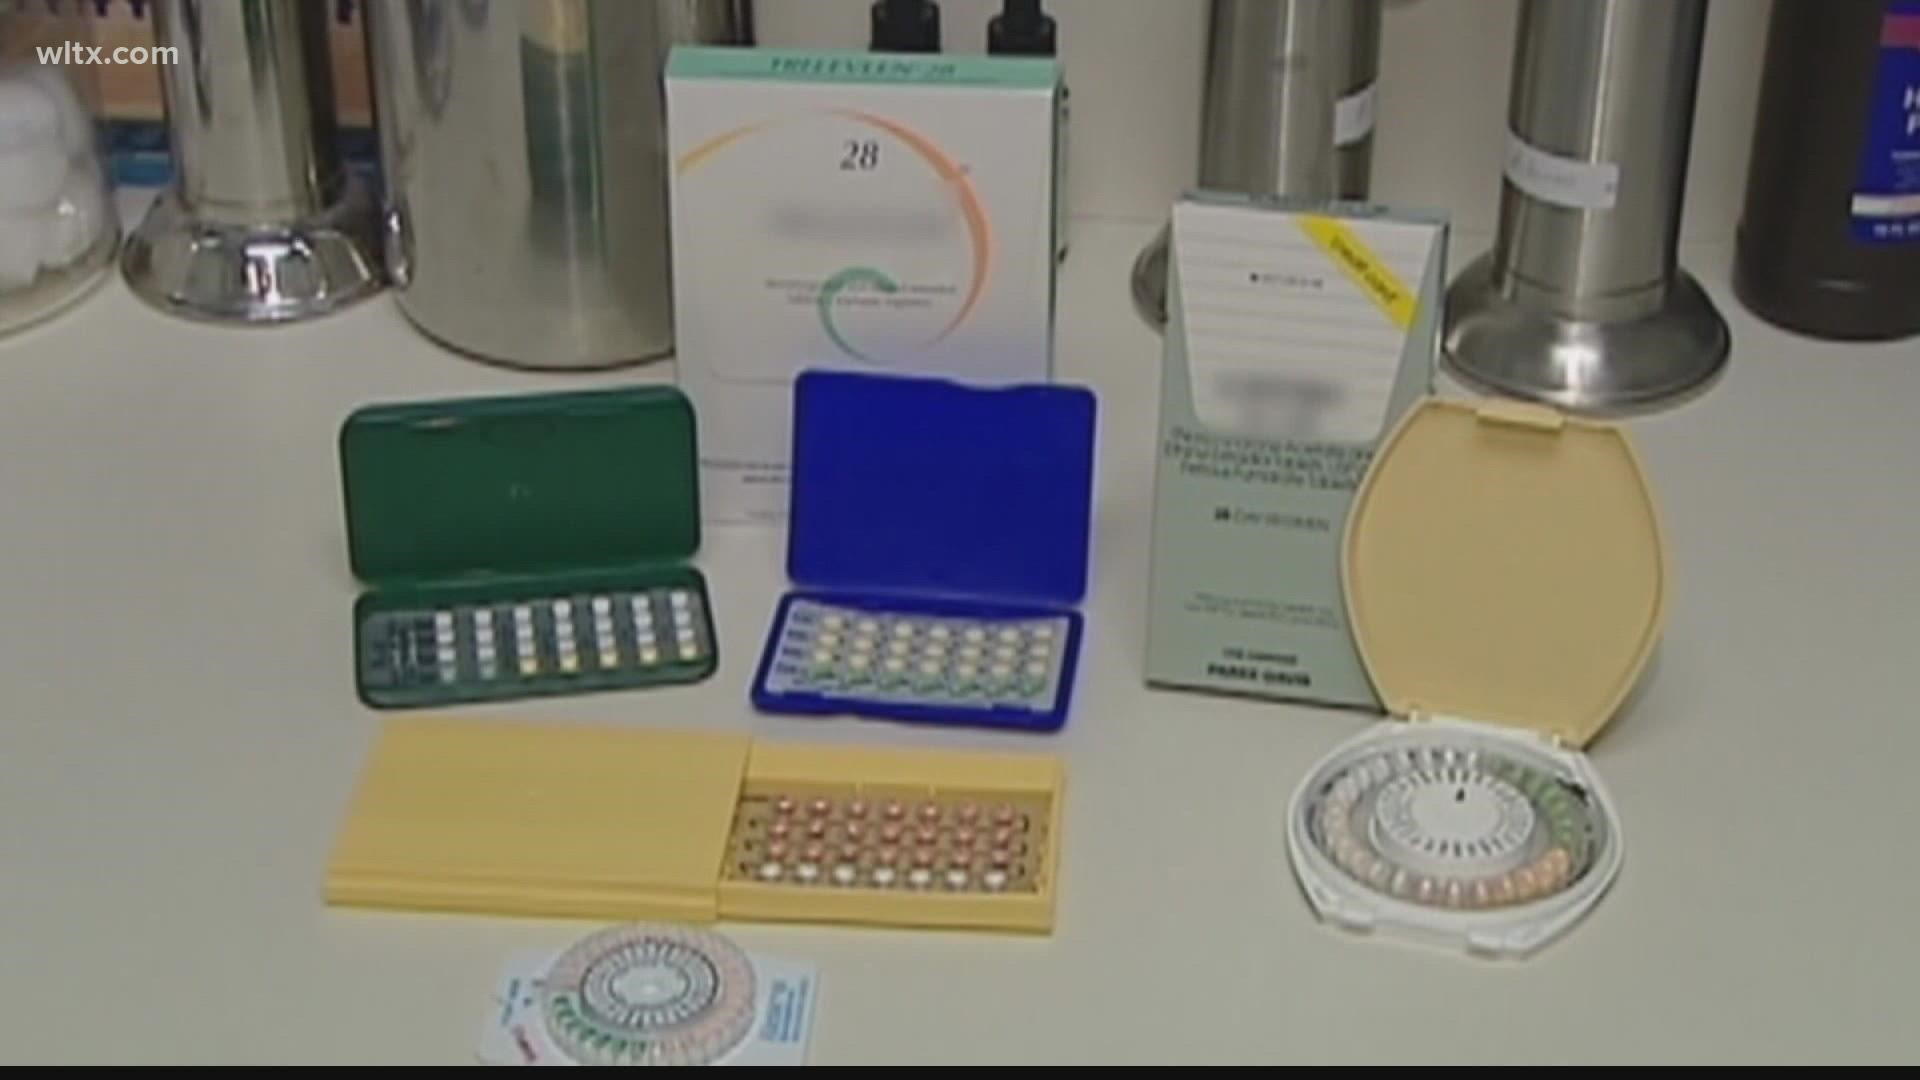 A bill that could make birth control more accessible in South Carolina is making its way through the House of Representatives.